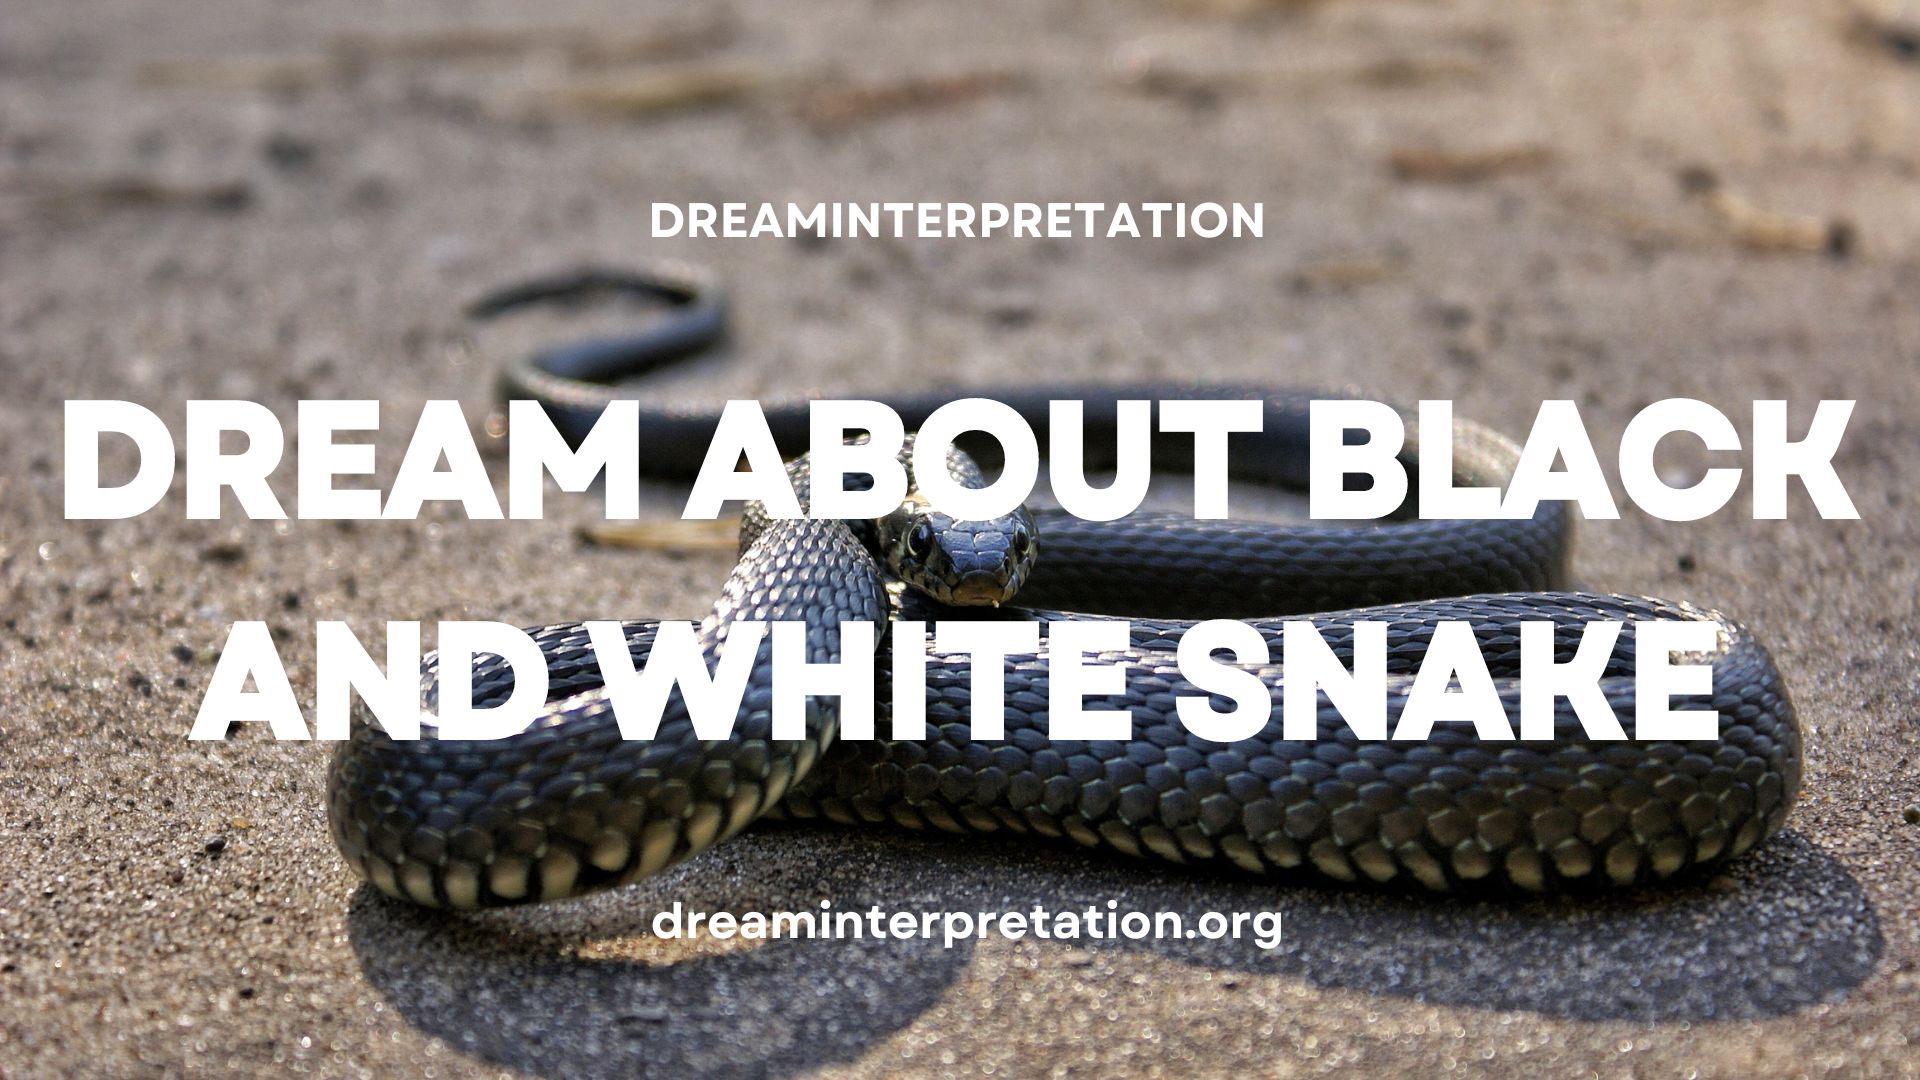 Dream About Black and White Snake